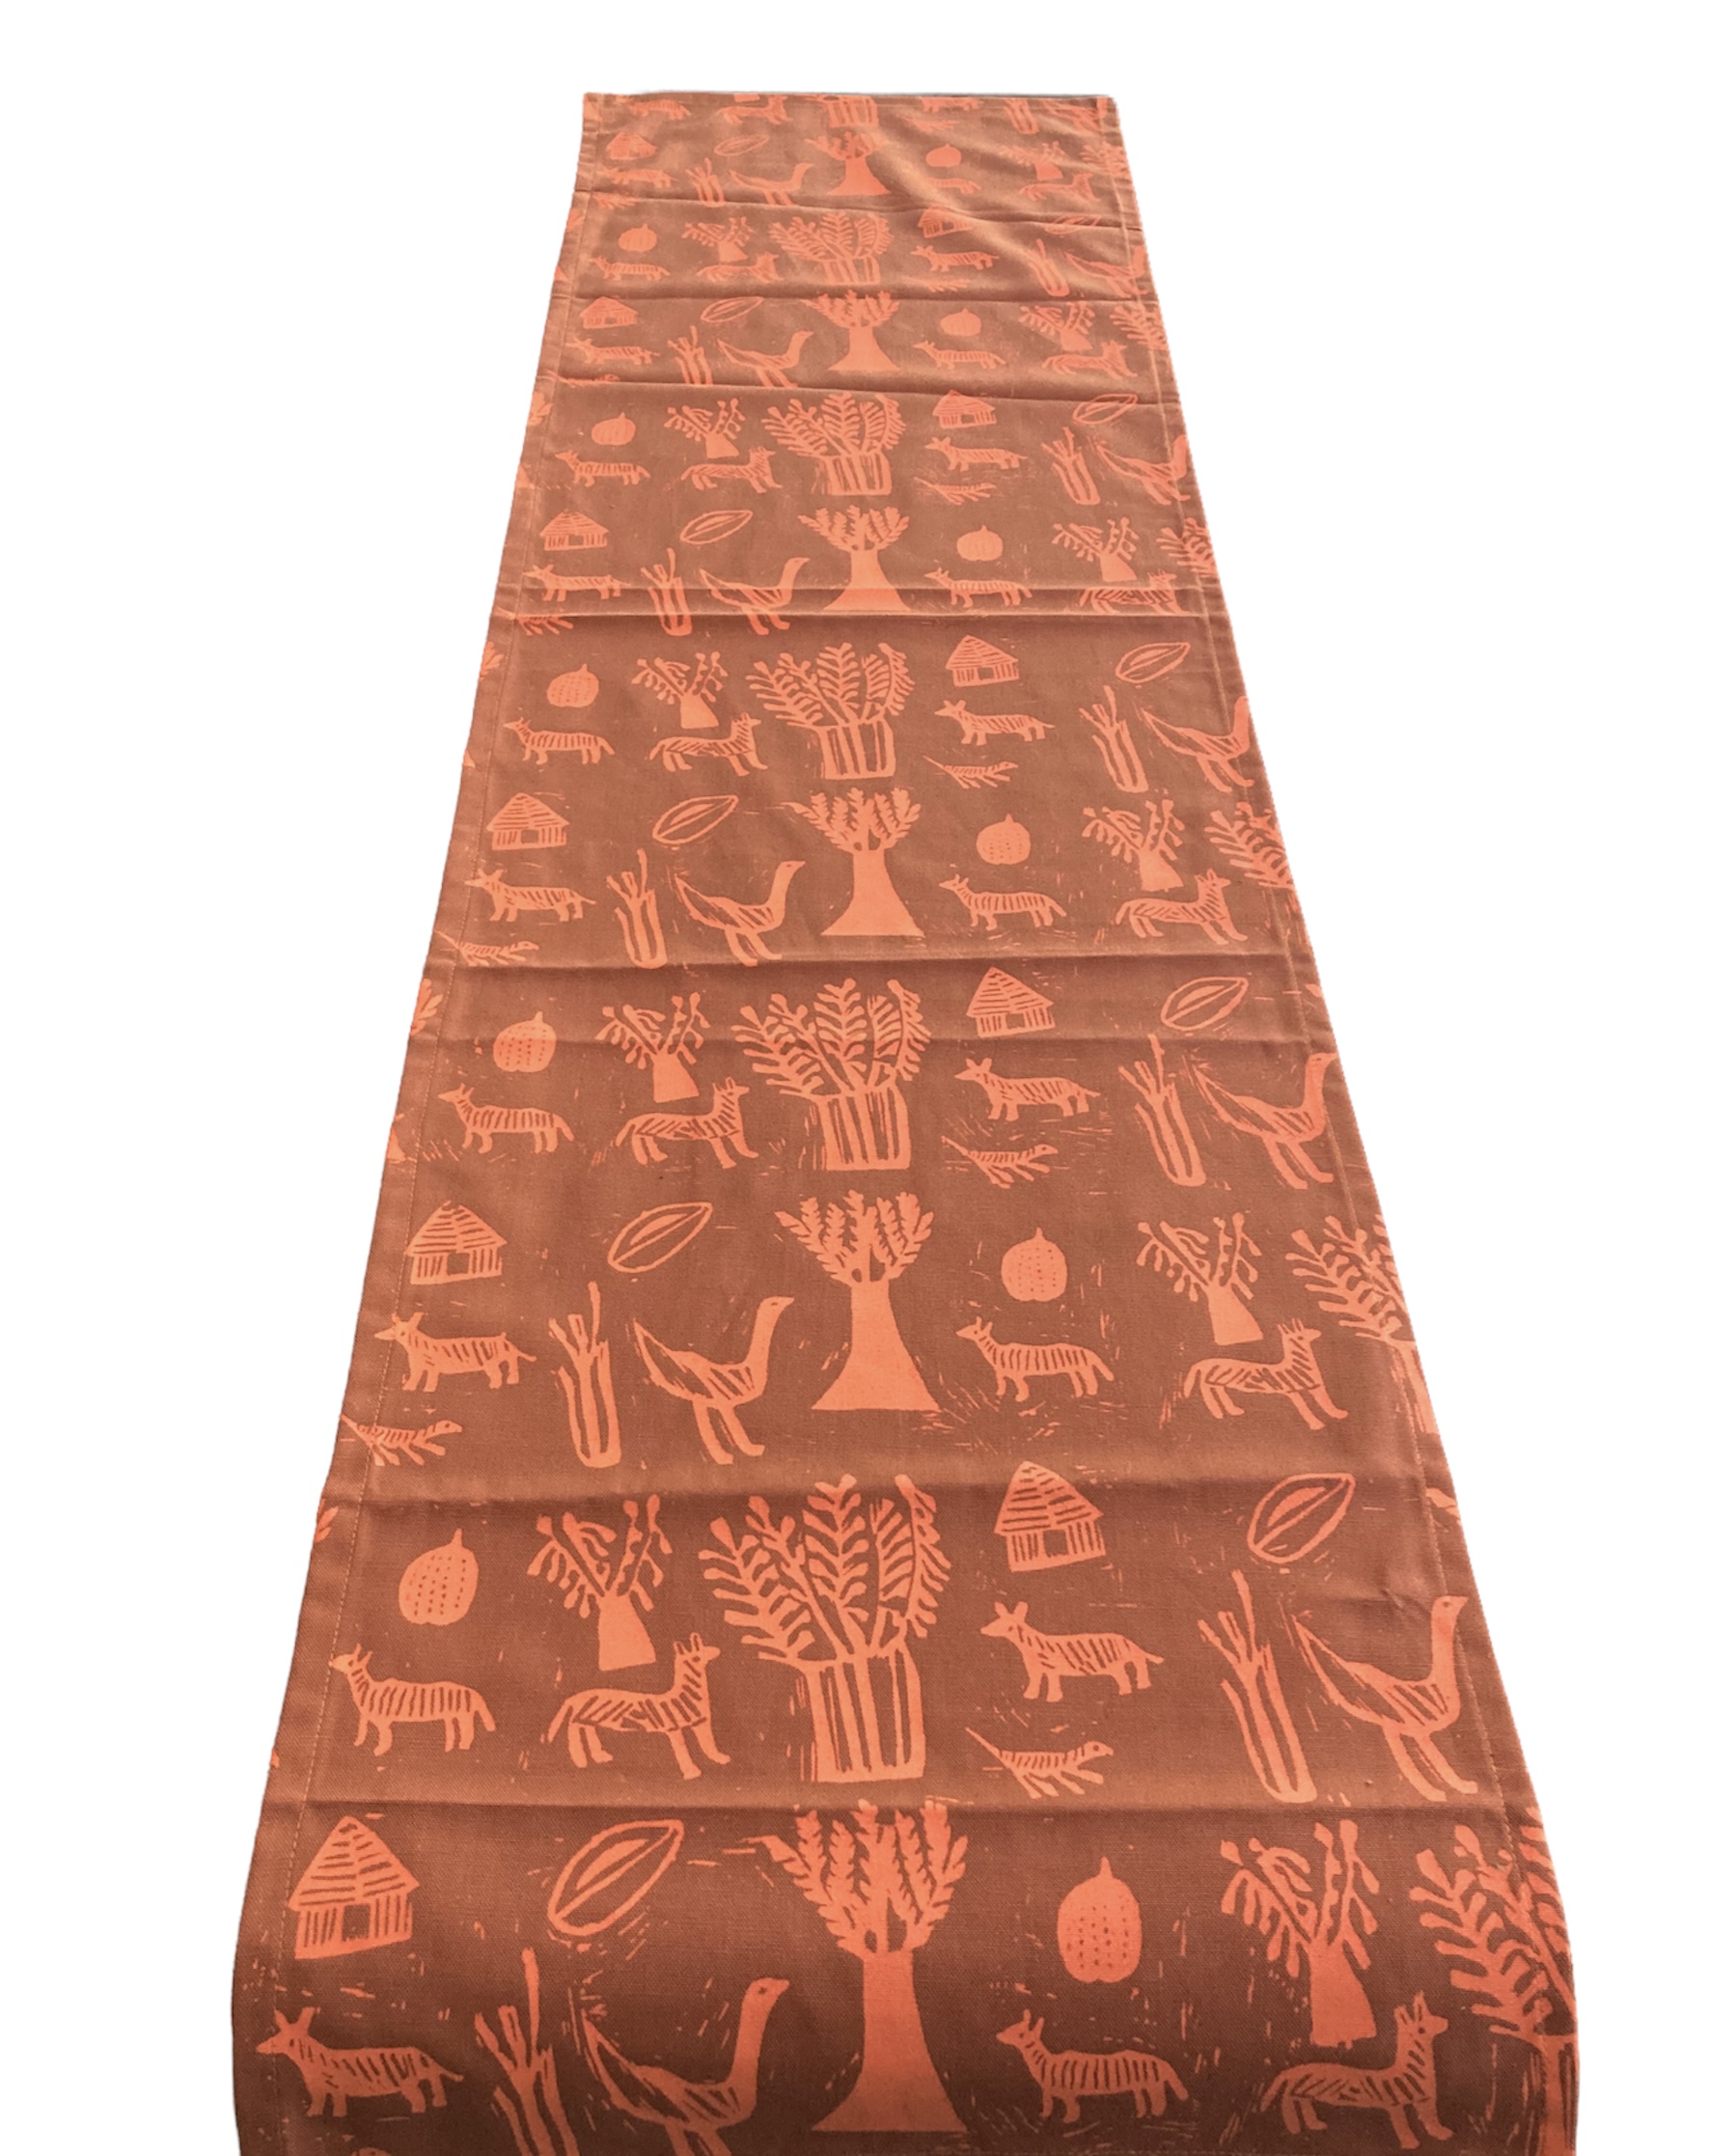 100% cotton Table Runner 58" x 16" from Namibia - Design 02s